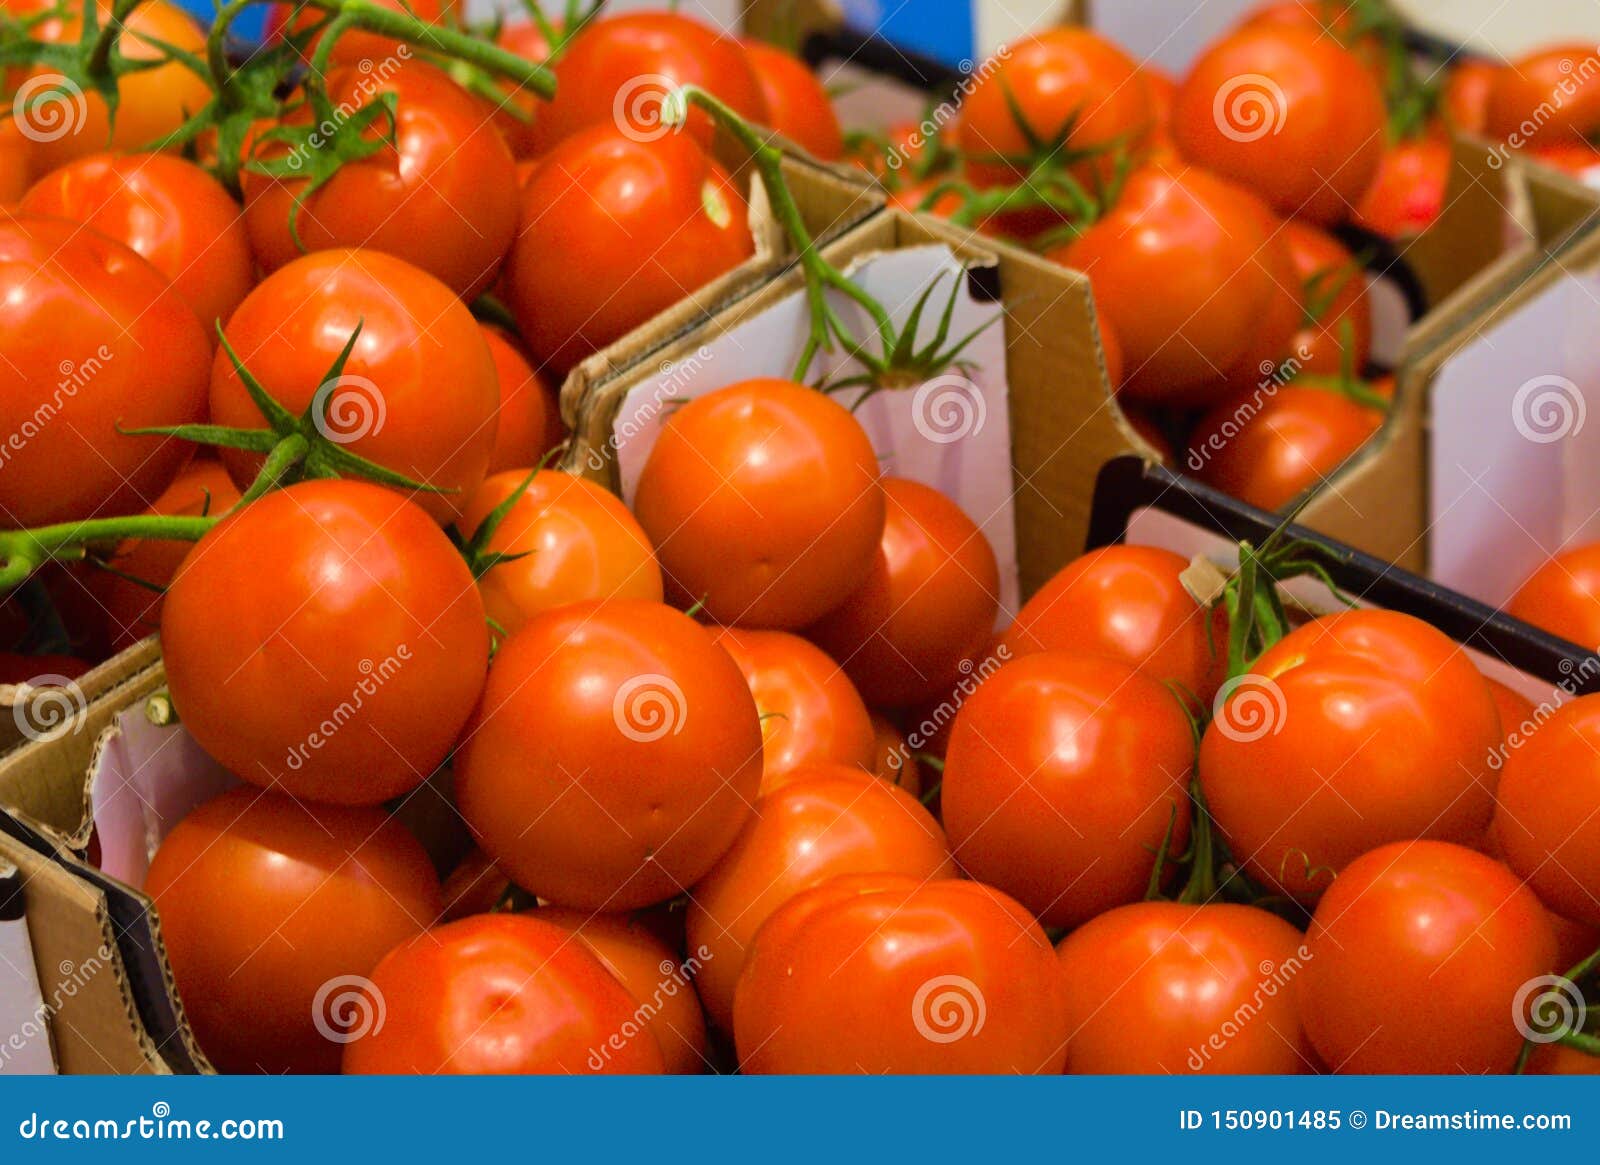 A box of fresh tomatoes stock image. Image of green - 150901485